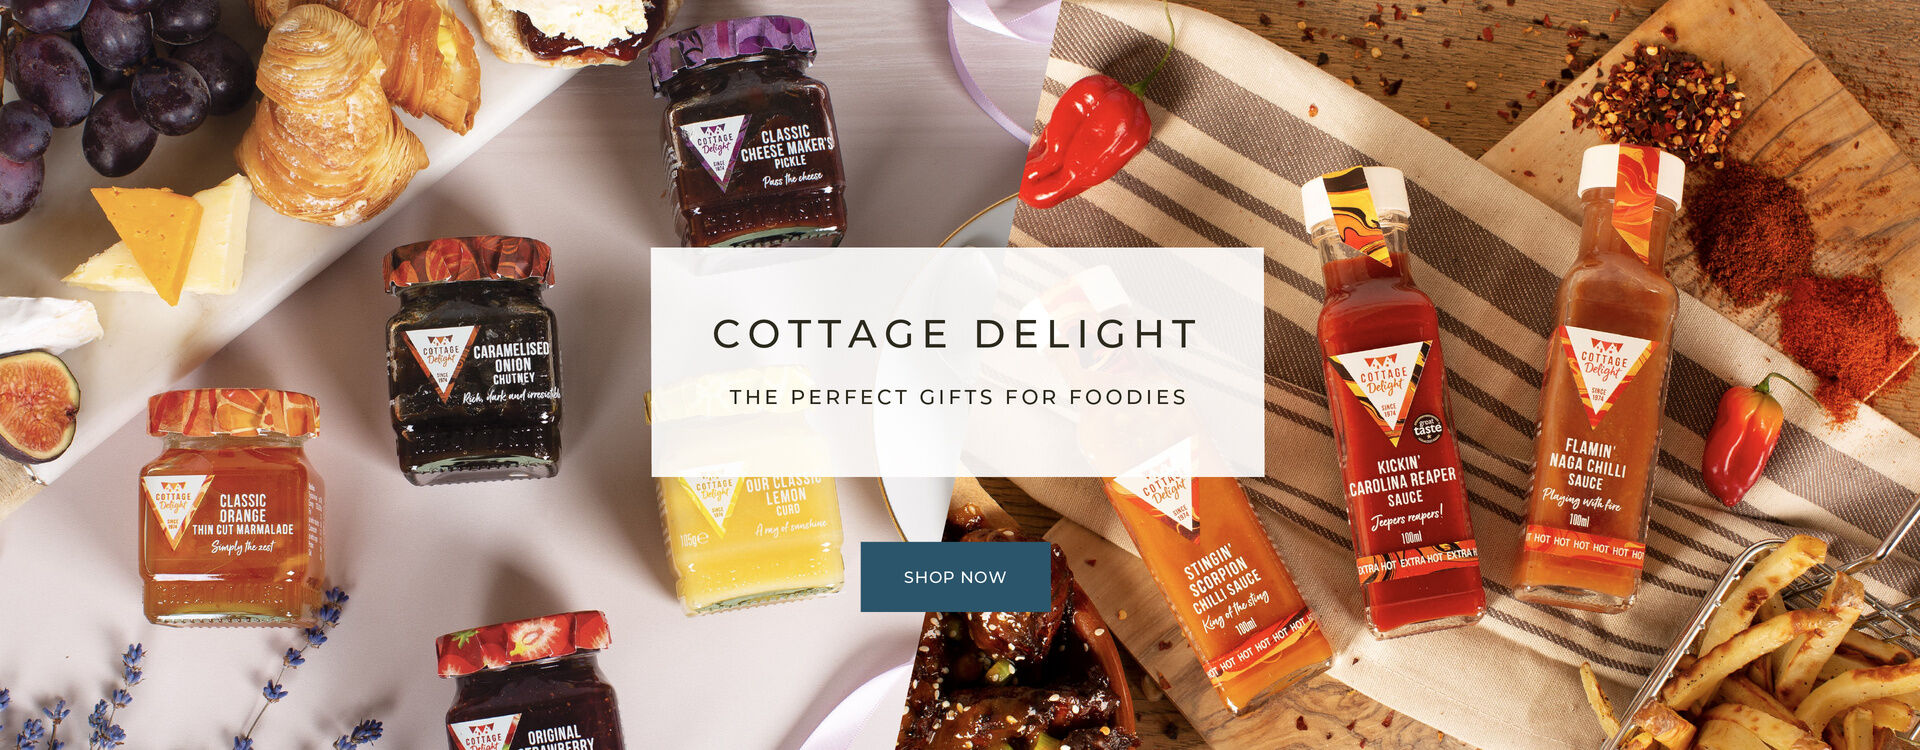 Cottage Delight Food Gifts